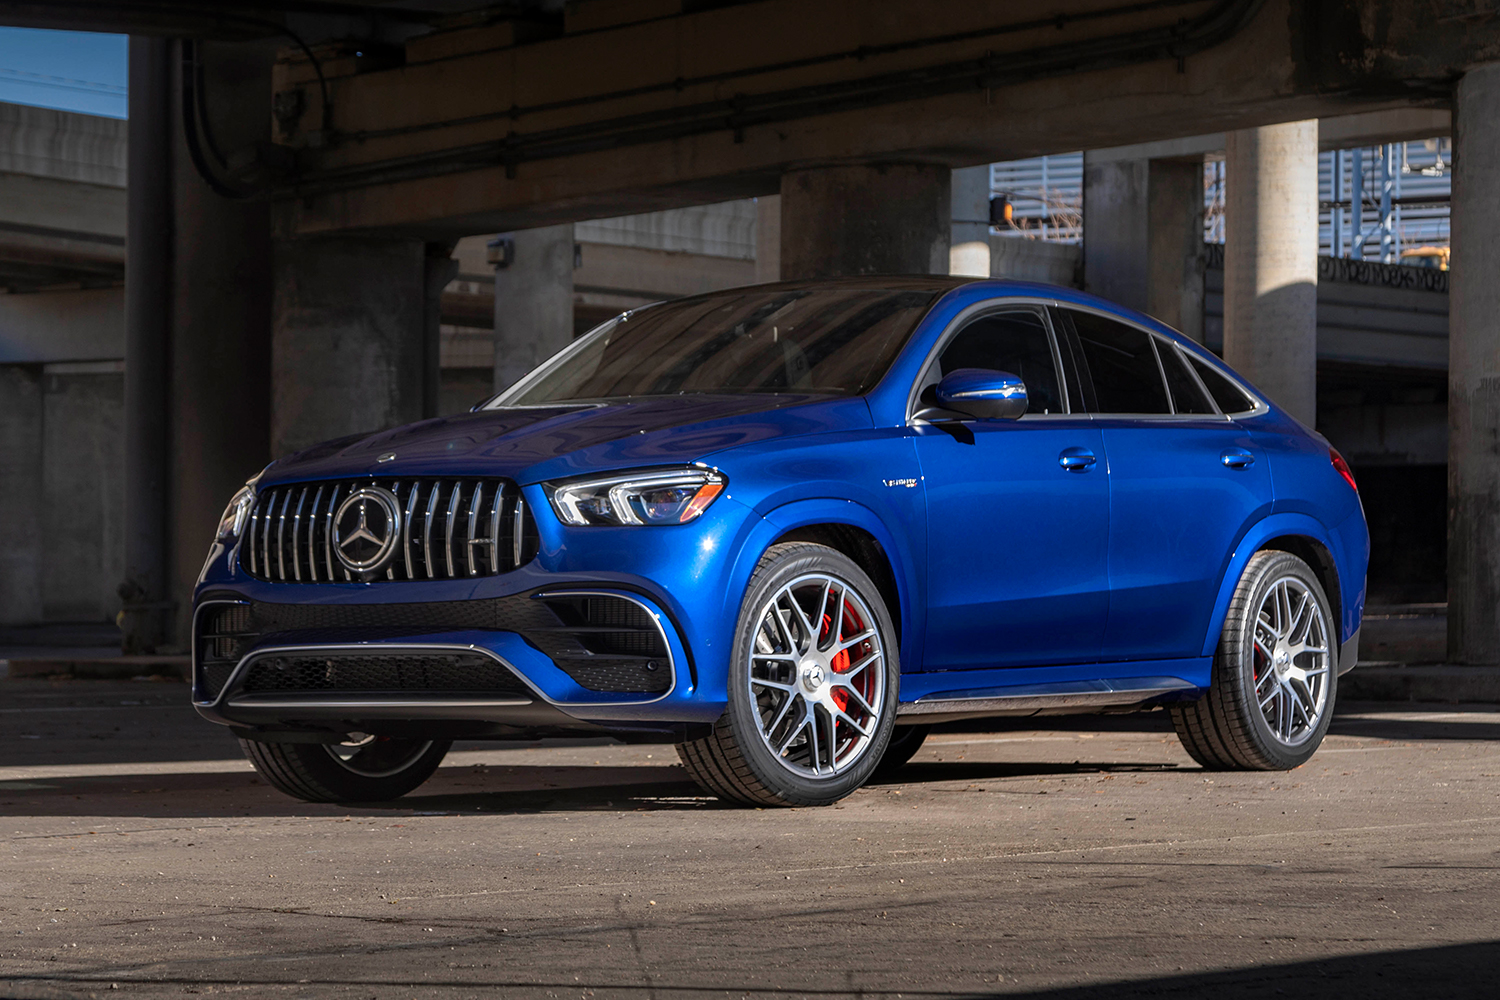 A blue Mercedes-AMG GLE 63 S Coupe sitting under an overpass